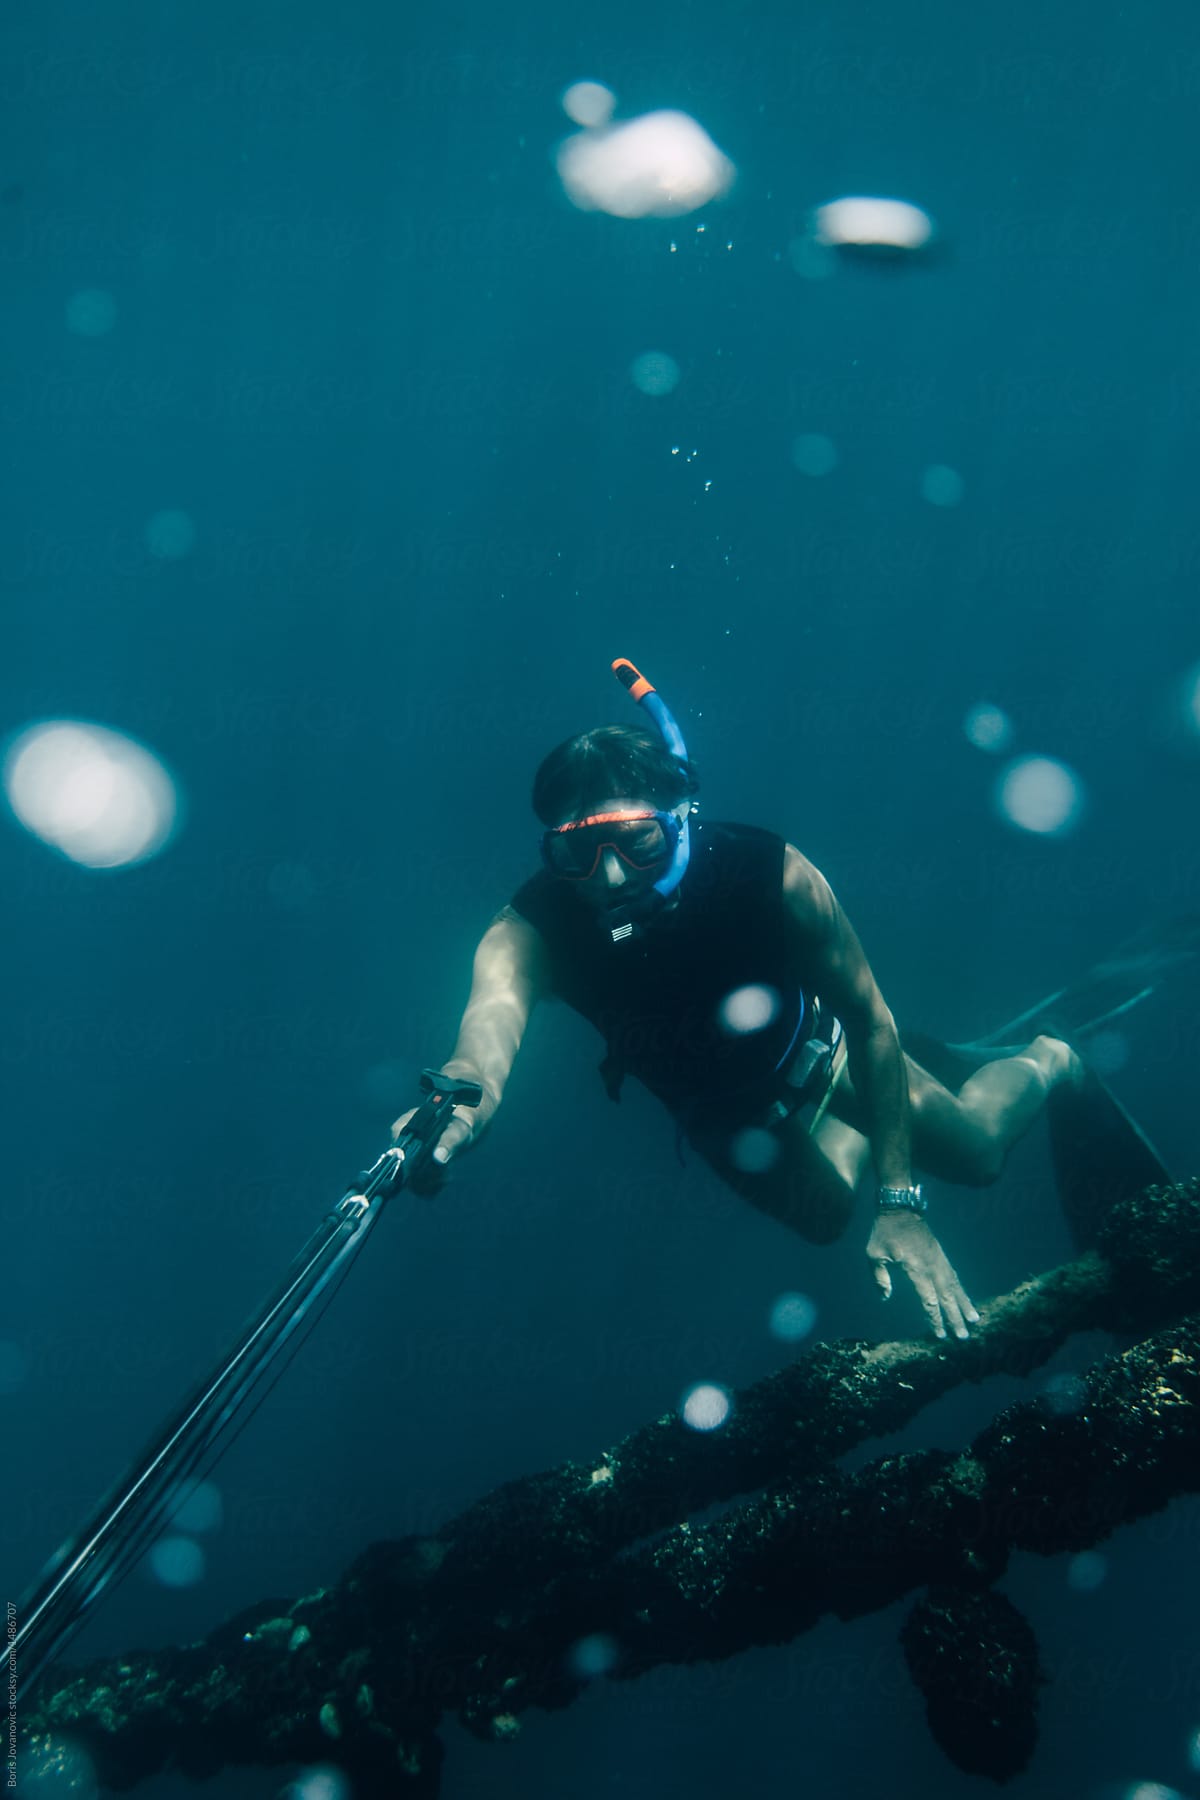 Diver hunting with underwater spear gun